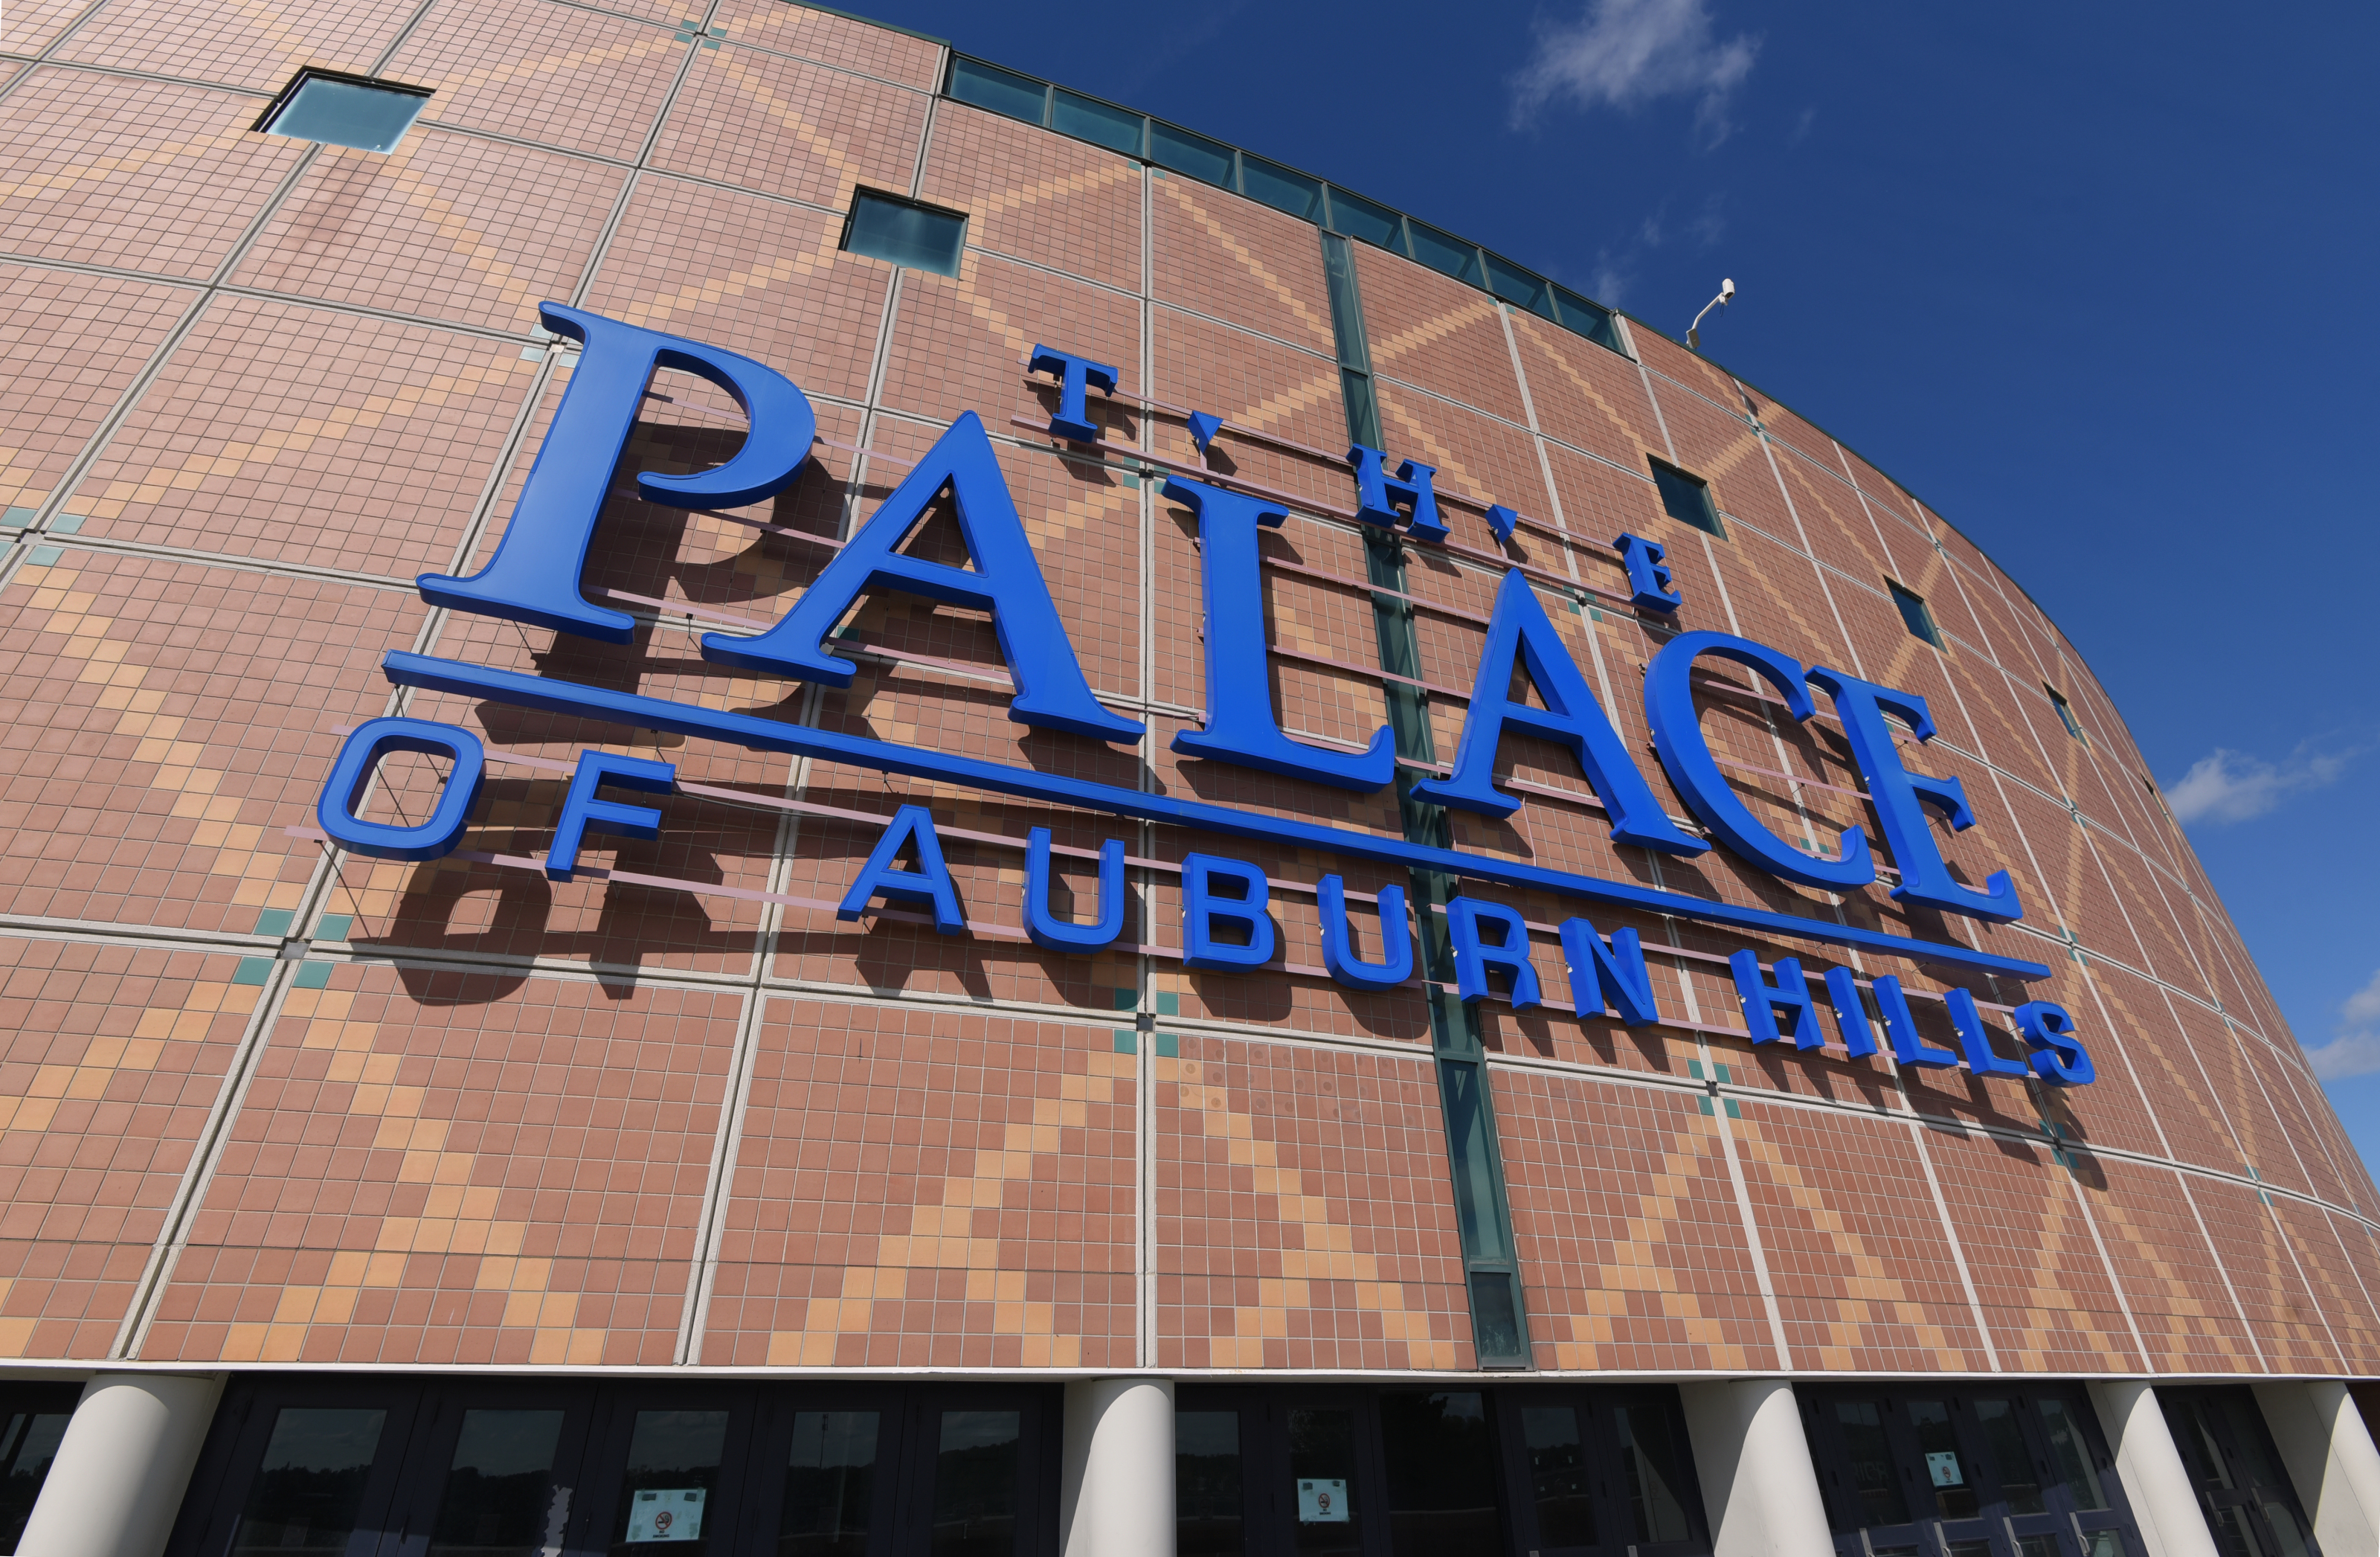 The story of the Palace of Auburn Hills: Somehow, it worked